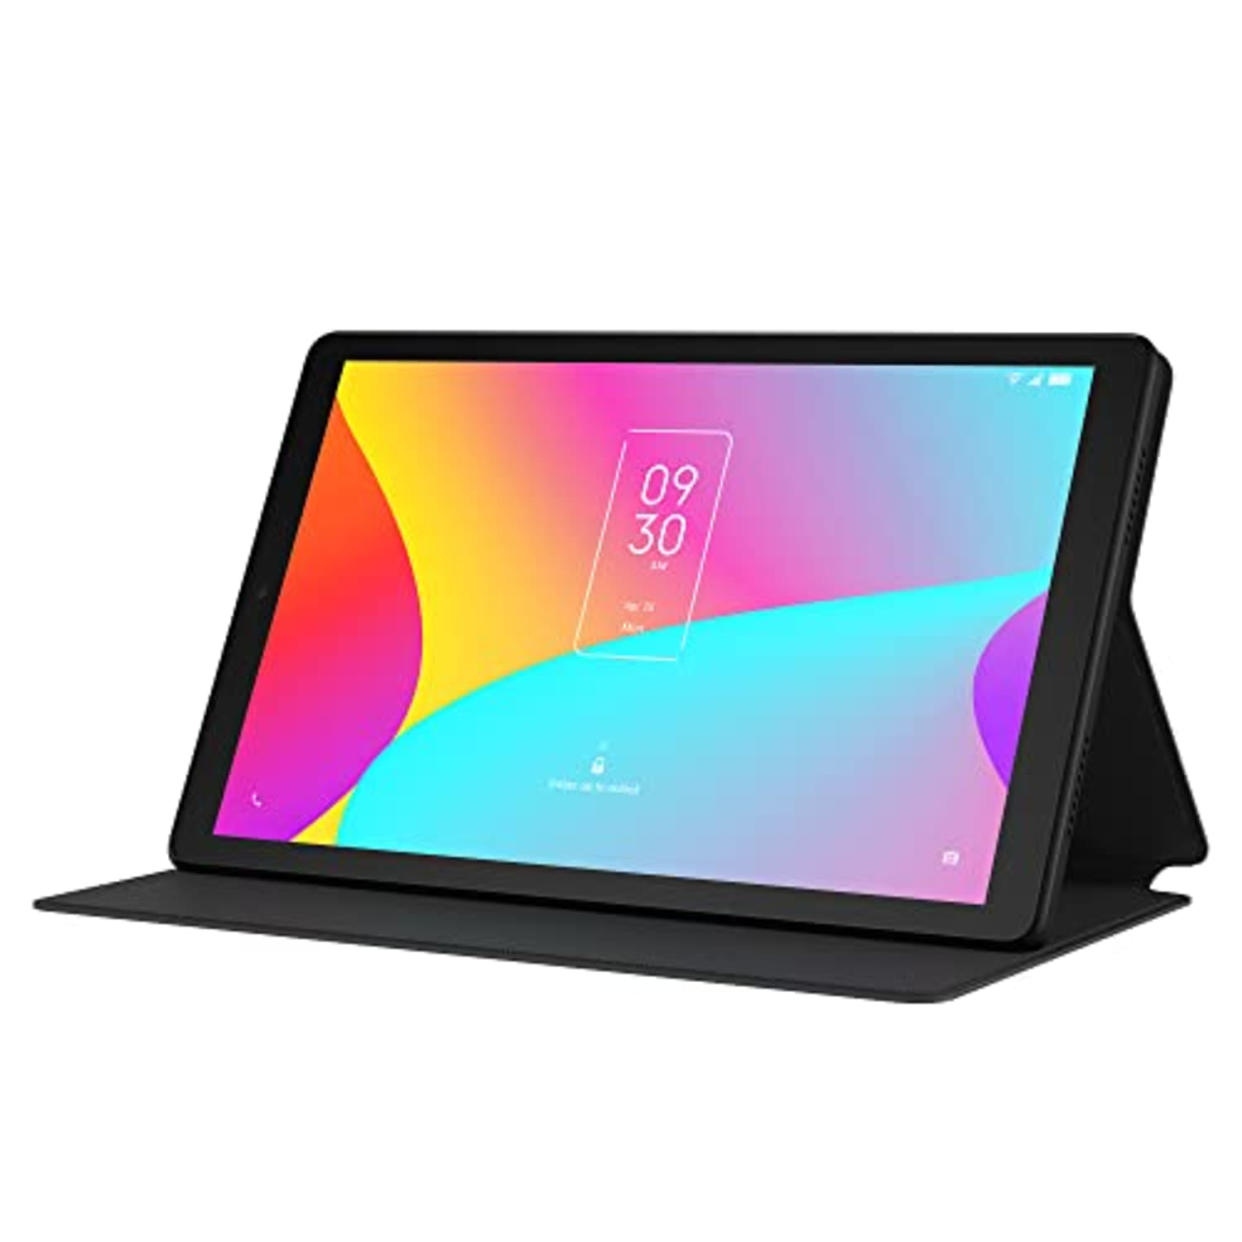 TCL TAB 8 Wi-Fi Android Tablet, 8 Inch HD Display, 3GB+32GB (Up to 512GB), 4080mAh Battery, Basic Tablet Android 11, with Tablet Case, Prime Black (AMAZON)